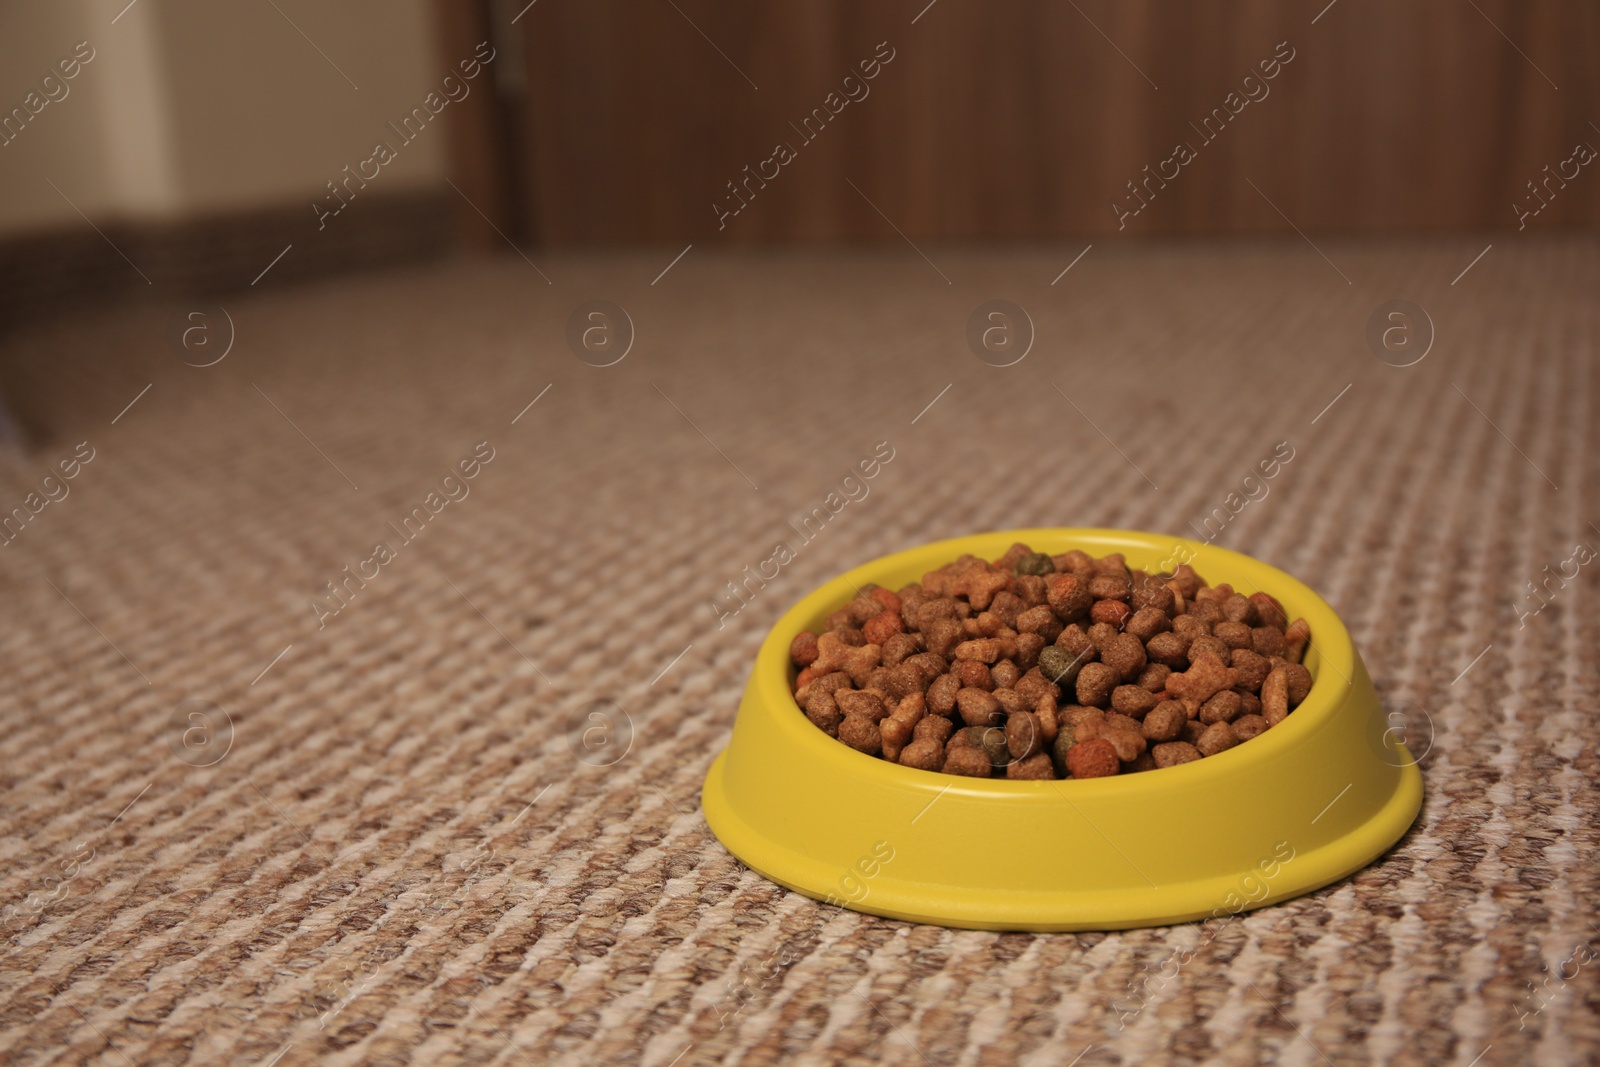 Photo of Dry pet food in feeding bowl on soft carpet indoors. Space for text